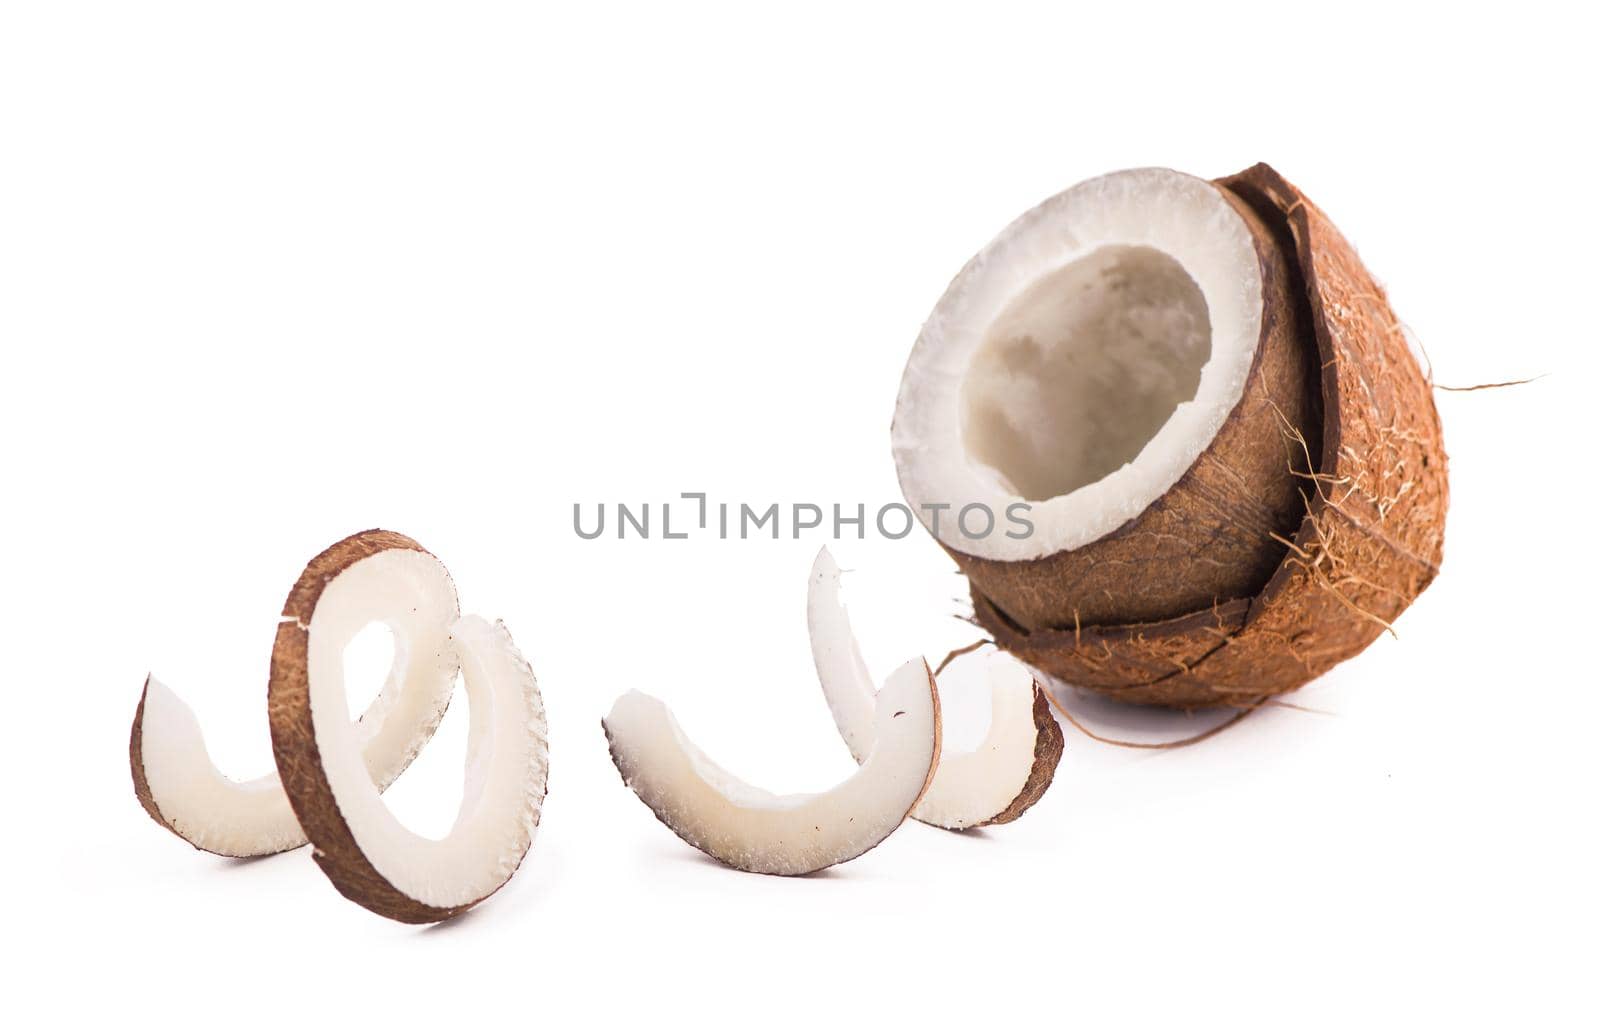 Coconuts with leaves on a white background.